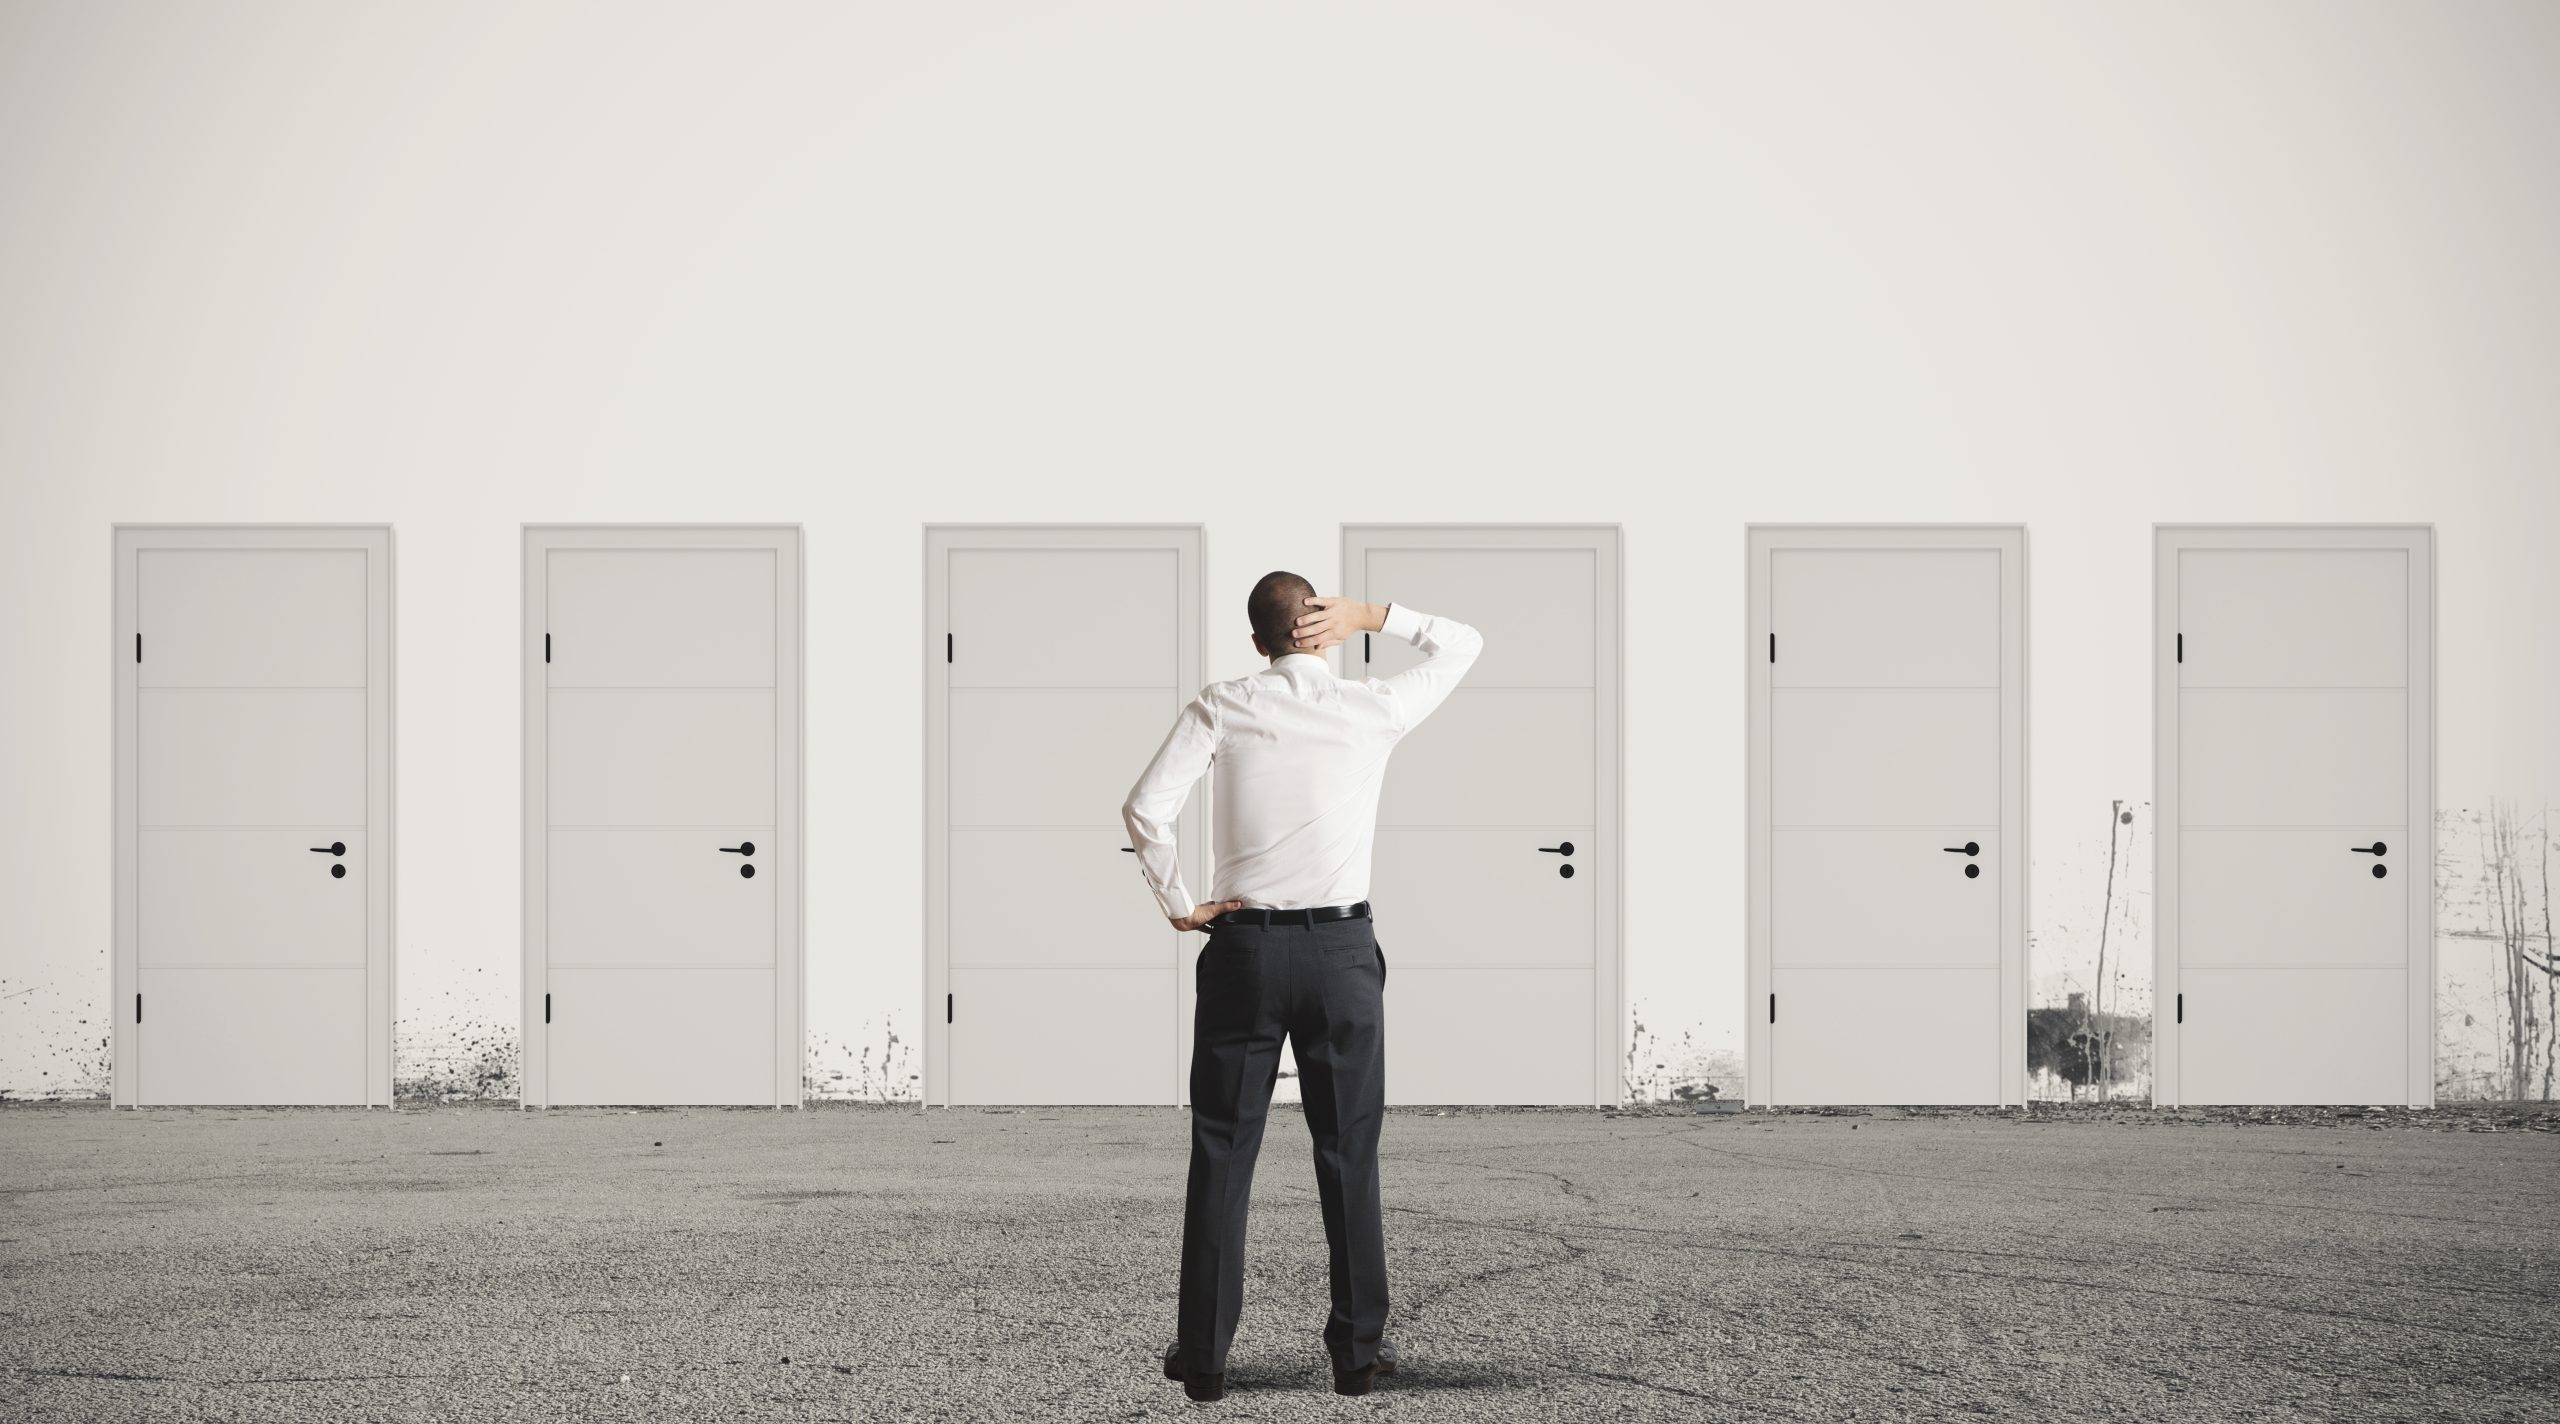 A person standing in front of 6 white doors seemingly struggling to make a decision